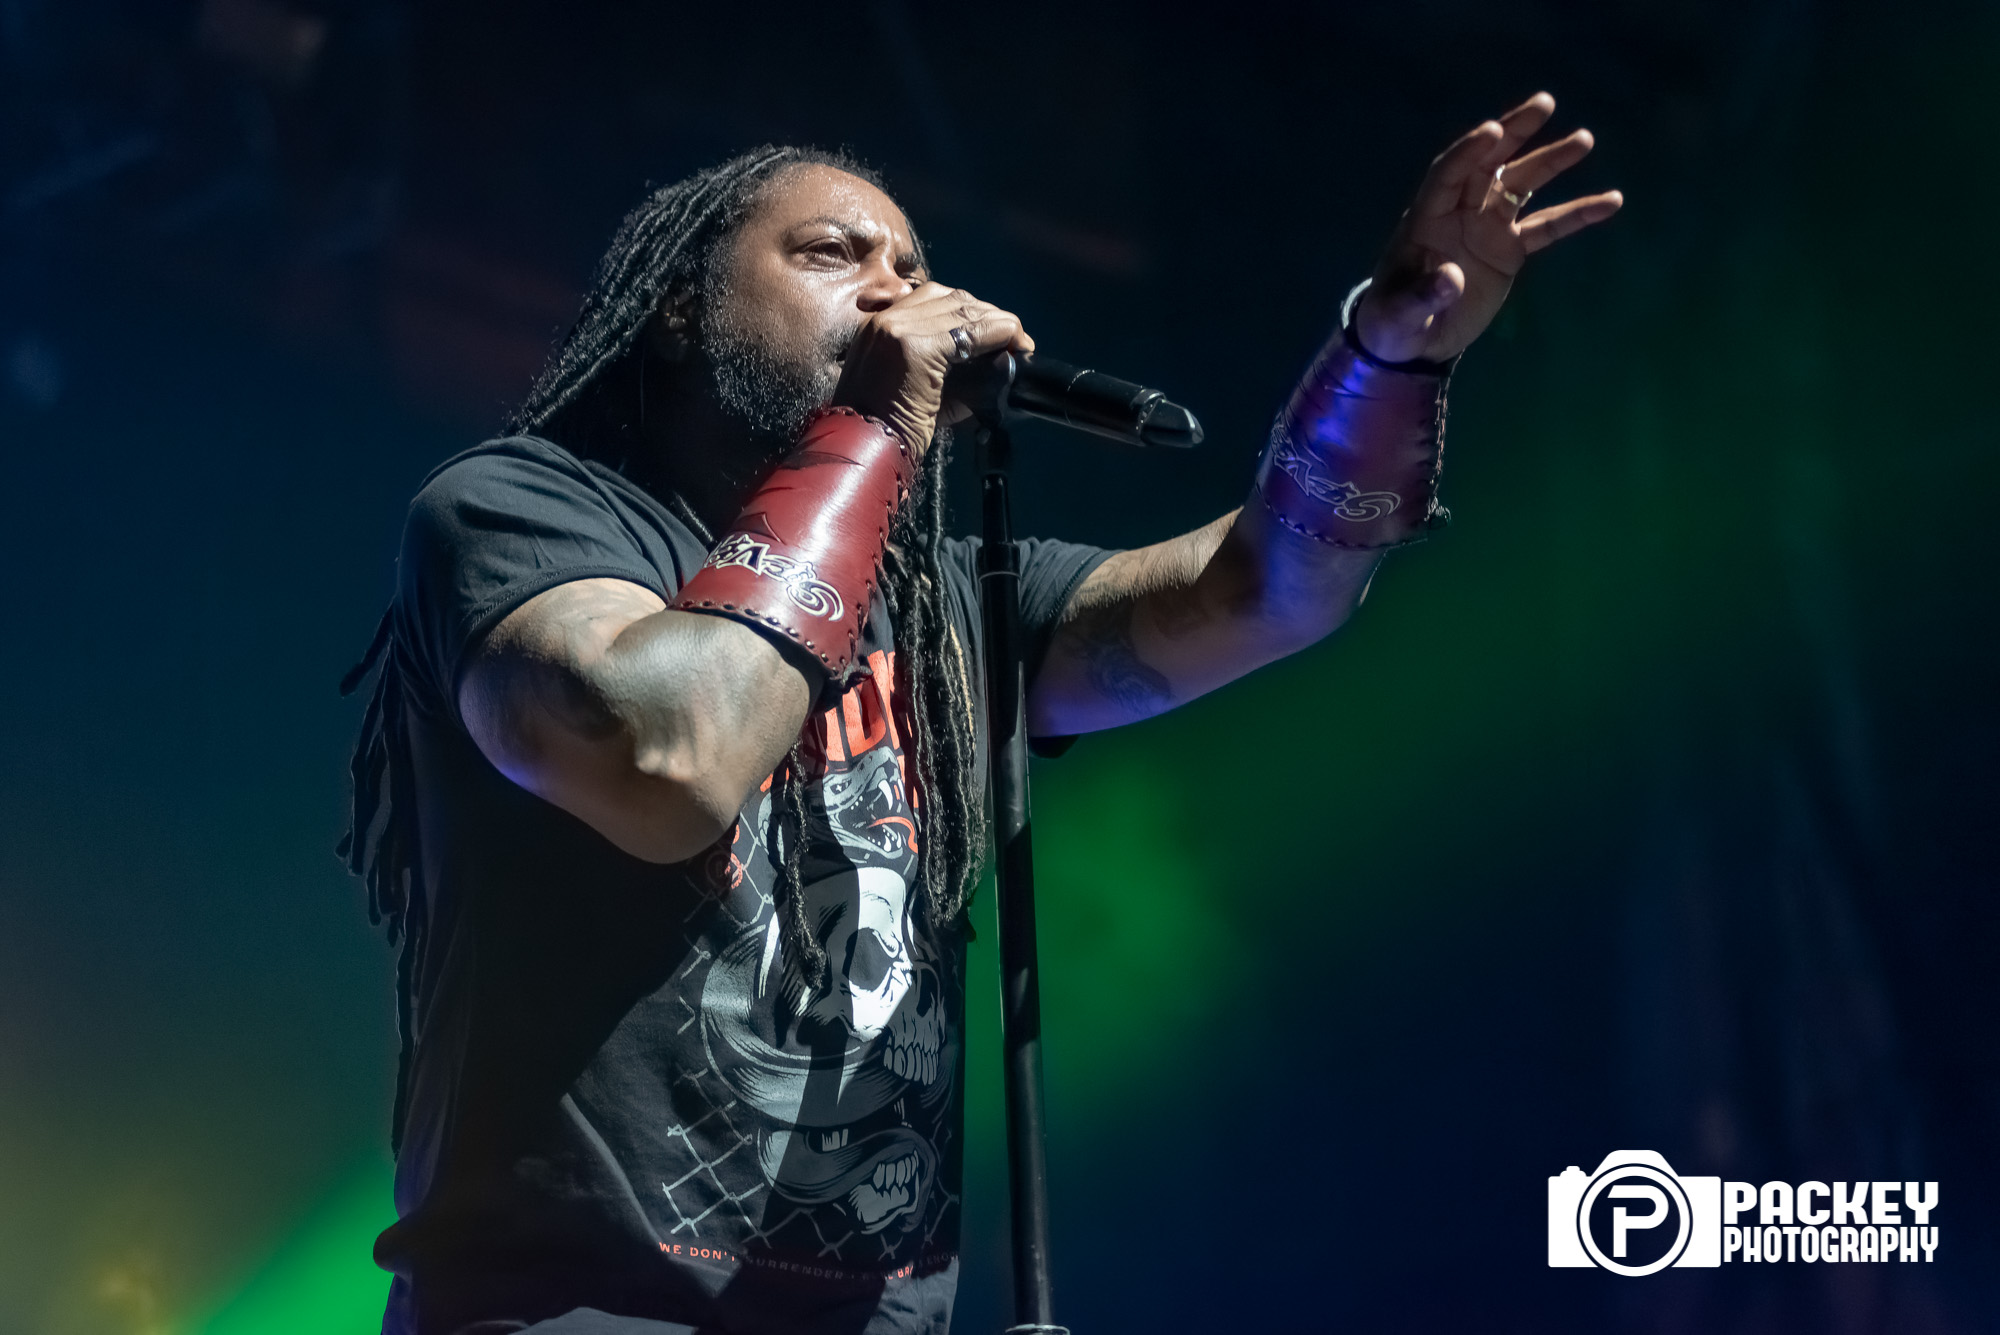 Lajon Witherspoon, singer for Sevendust